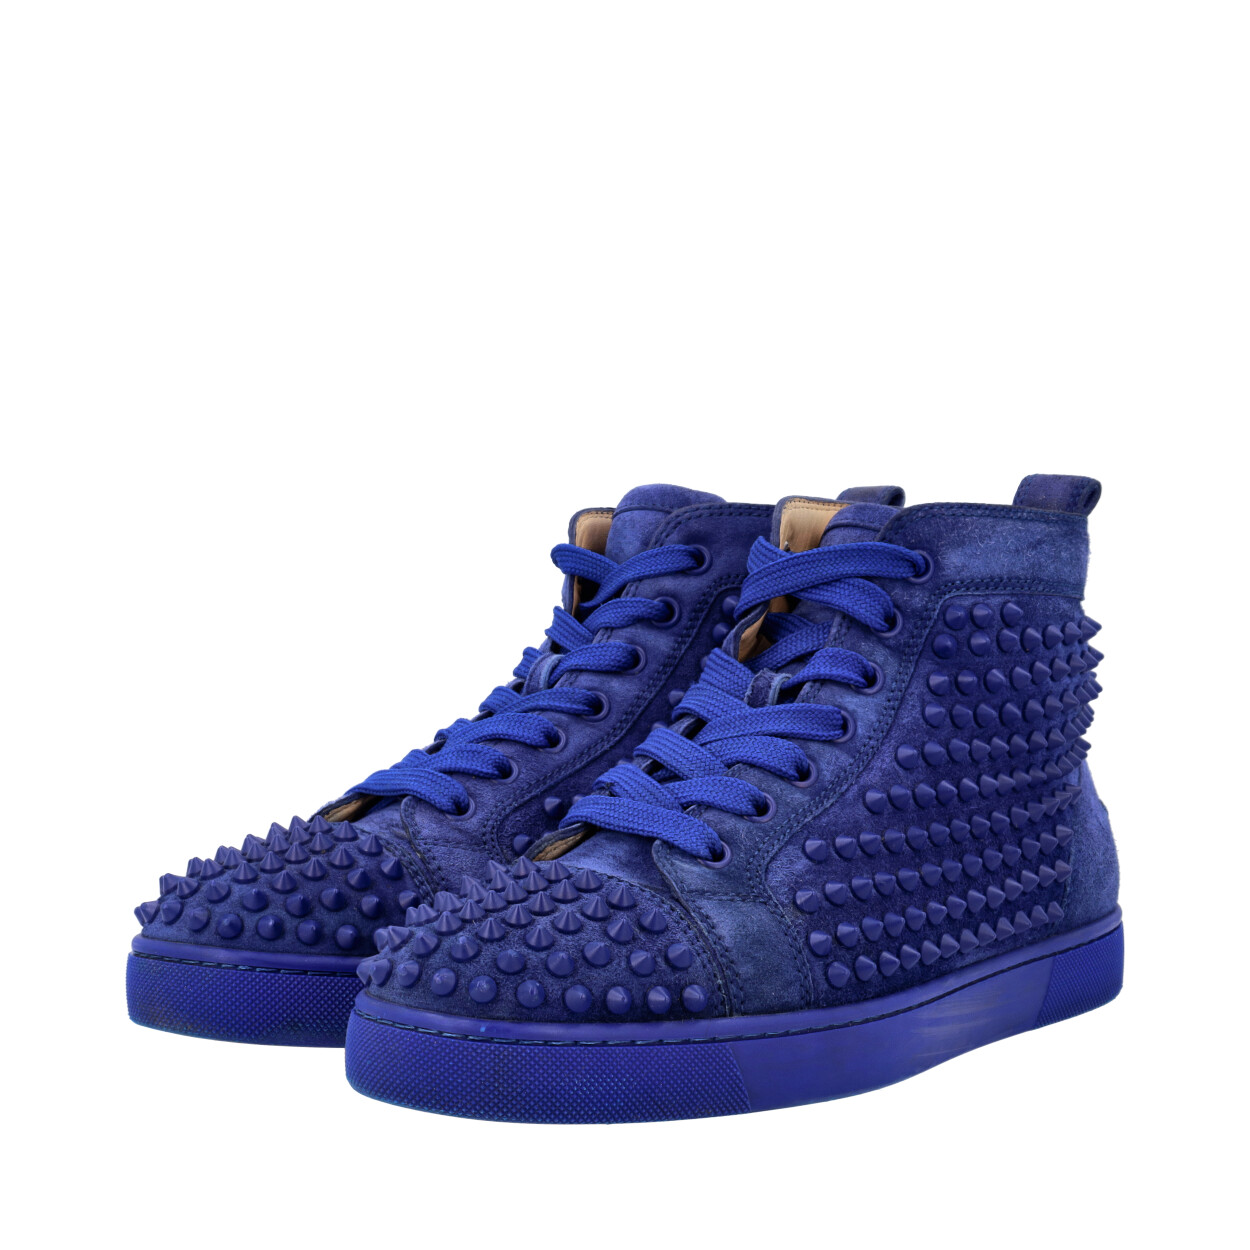 Christian Louboutin Burgundy Suede Louis Spikes High Top Sneakers